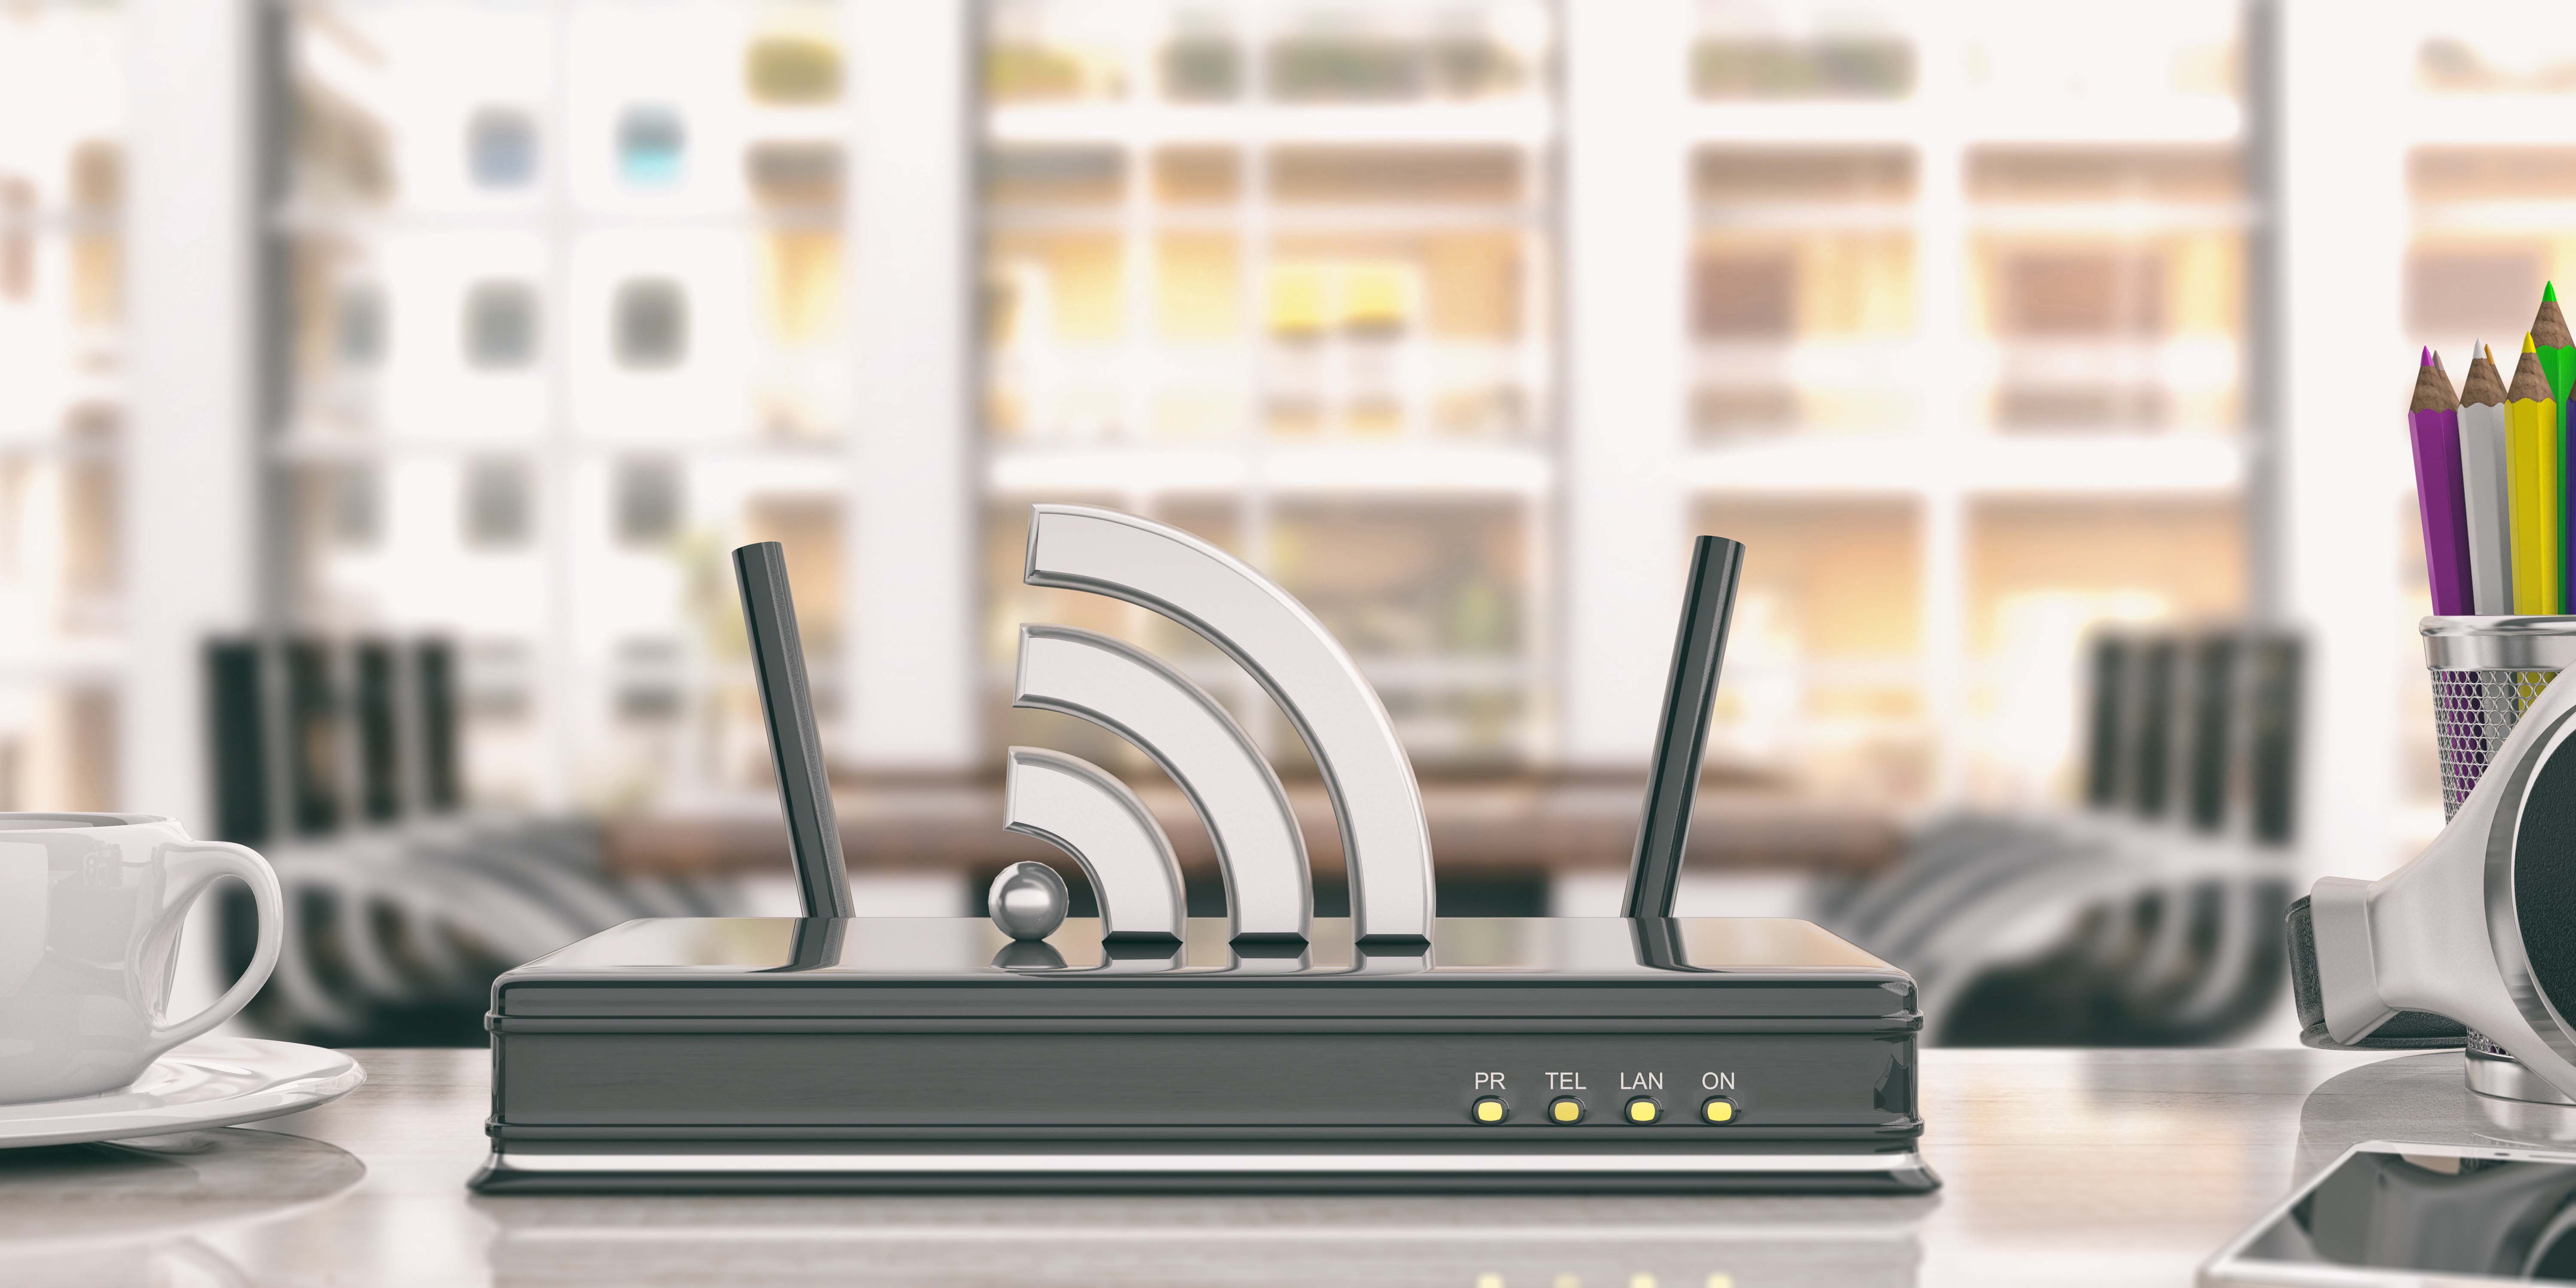 How to Secure Your Wi-Fi Router